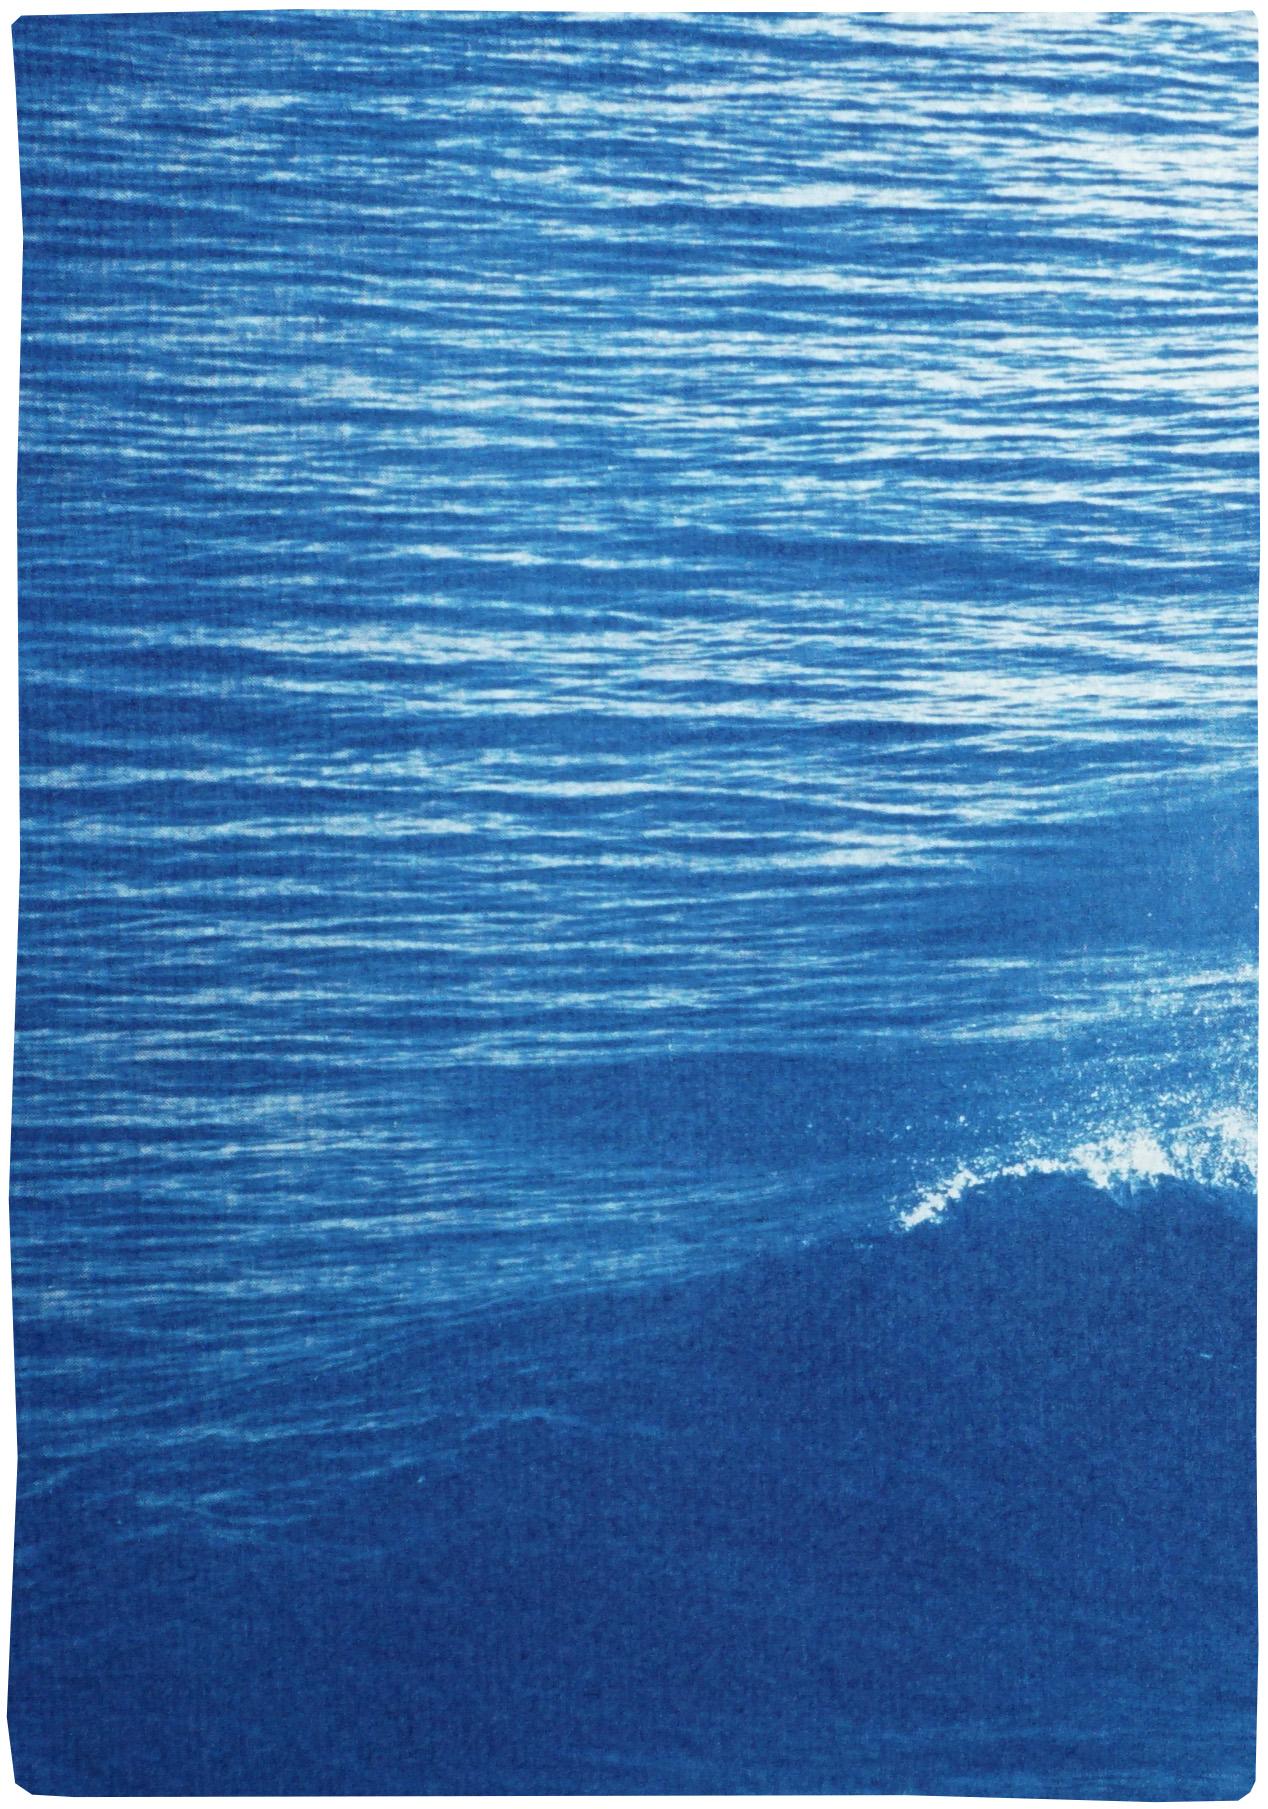 Colossal Seascape Triptych of Crashing Wave in Los Angeles, Exclusive Cyanotype - Blue Landscape Painting by Kind of Cyan